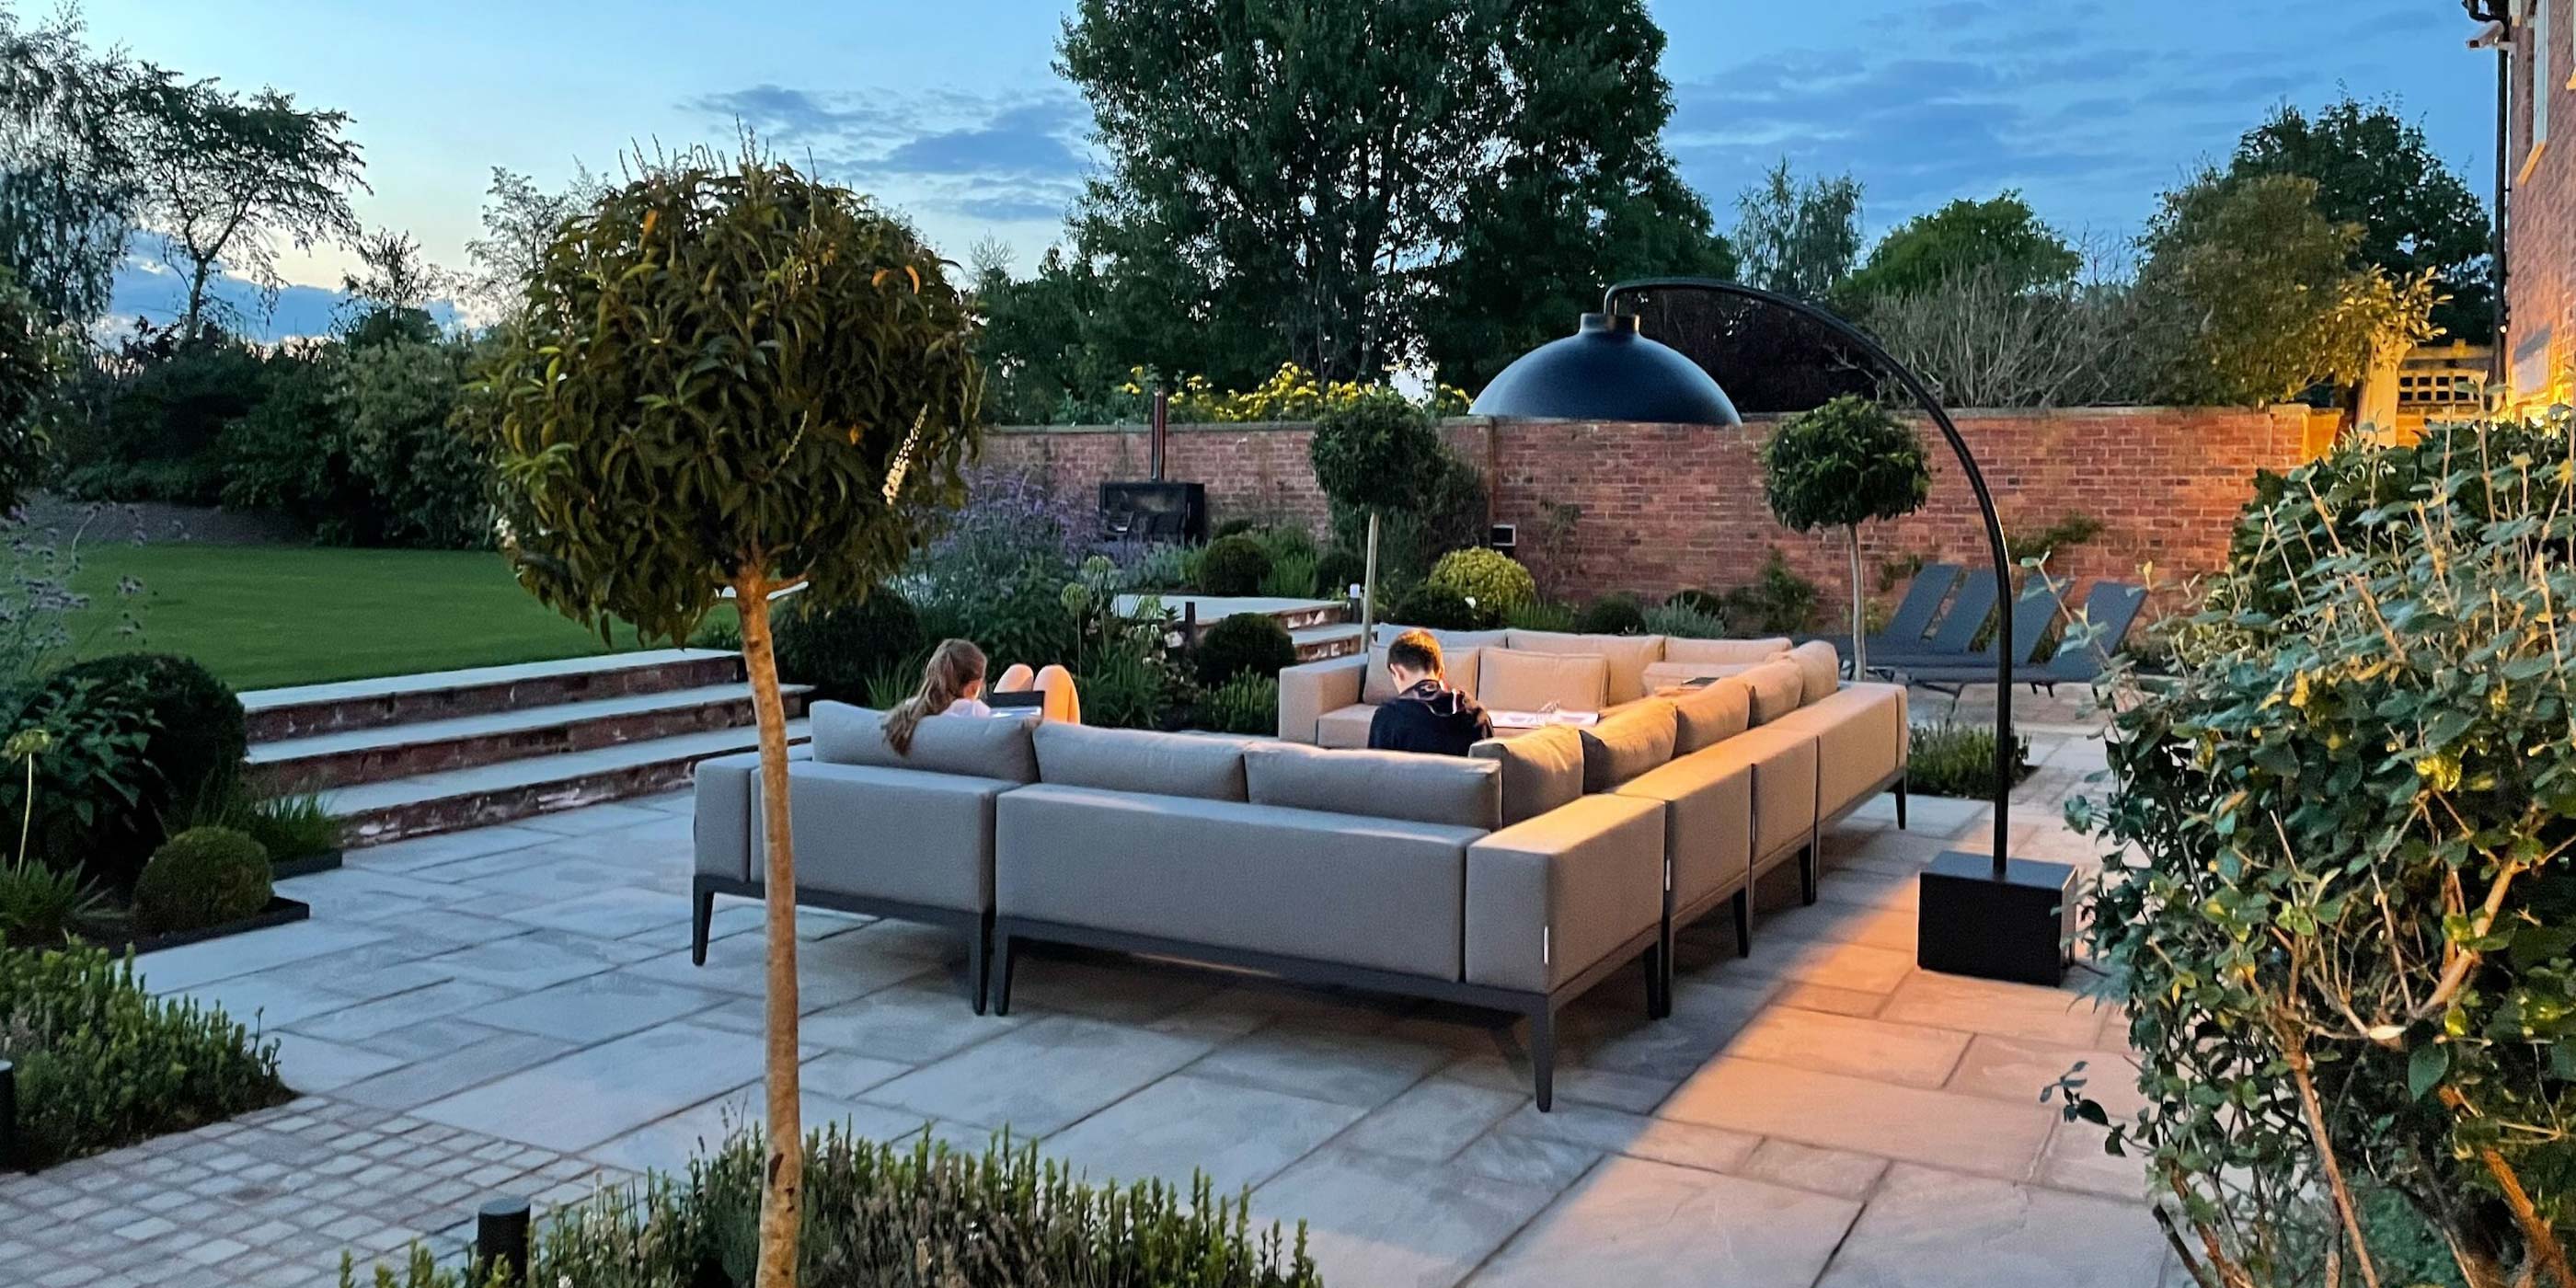 Grey Fabric Outdoor Furniture On A Summers Evening